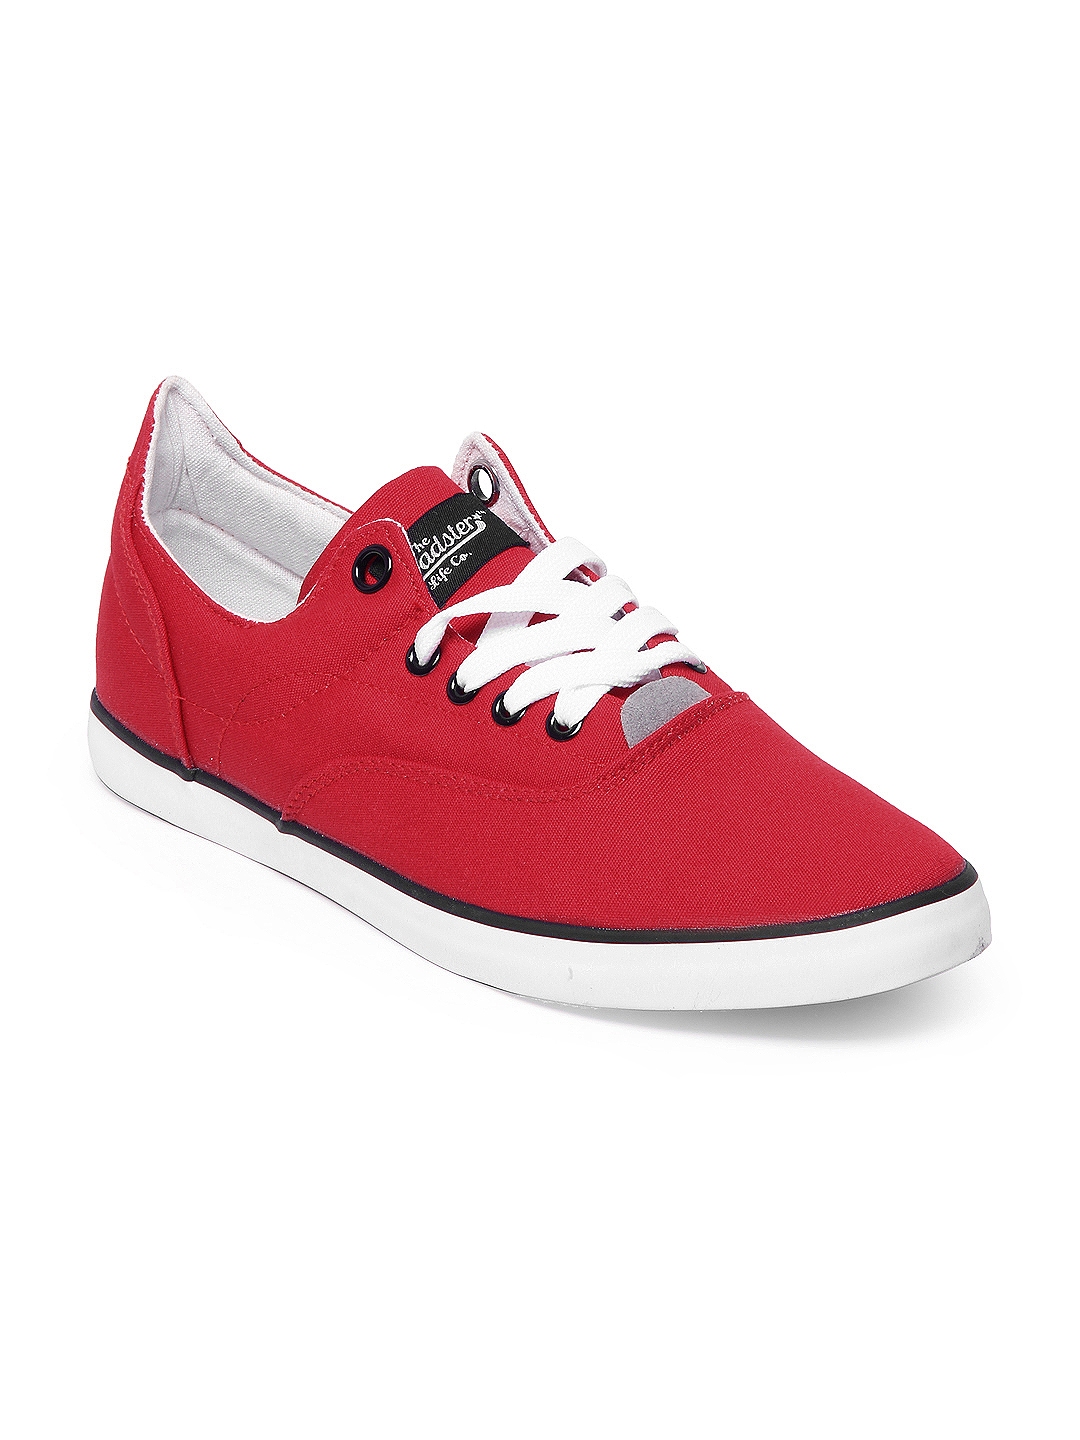 Buy Roadster Men Red Casual Shoes - Casual Shoes for Men 168631 | Myntra